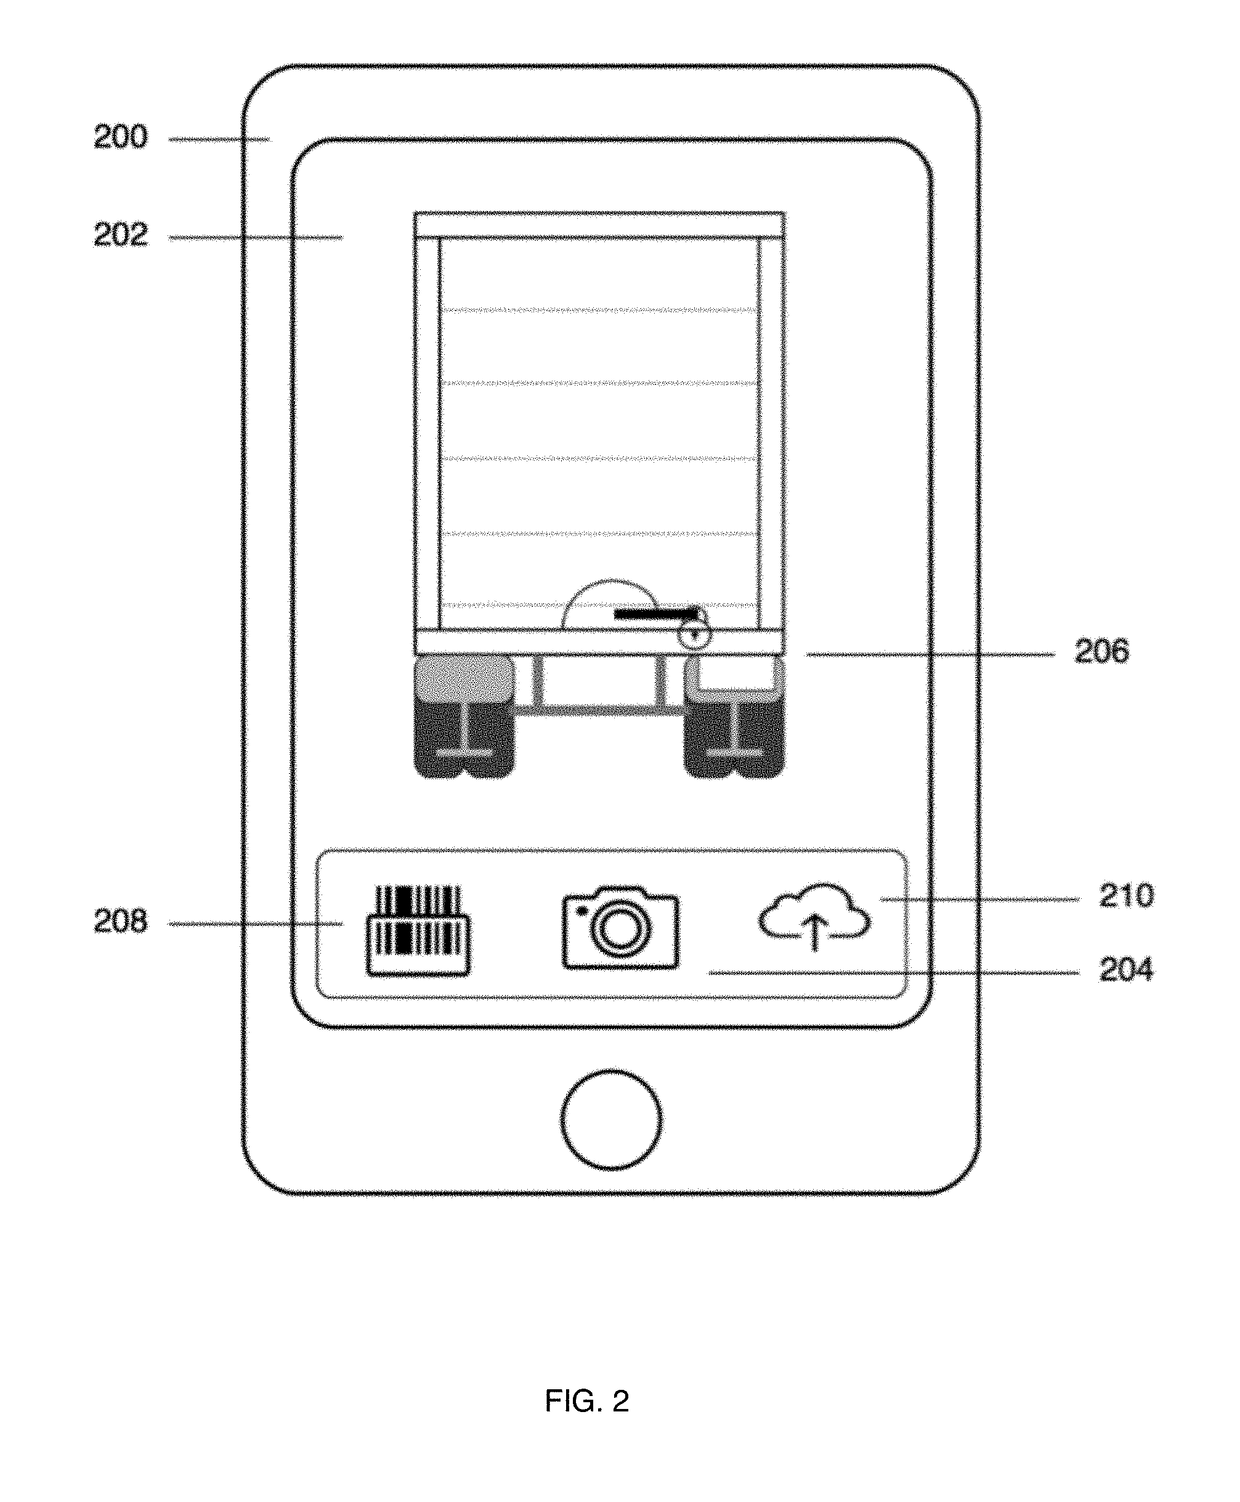 Mobile application user interface for efficiently managing and assuring the safety, quality and security of goods stored within a truck, tractor or trailer